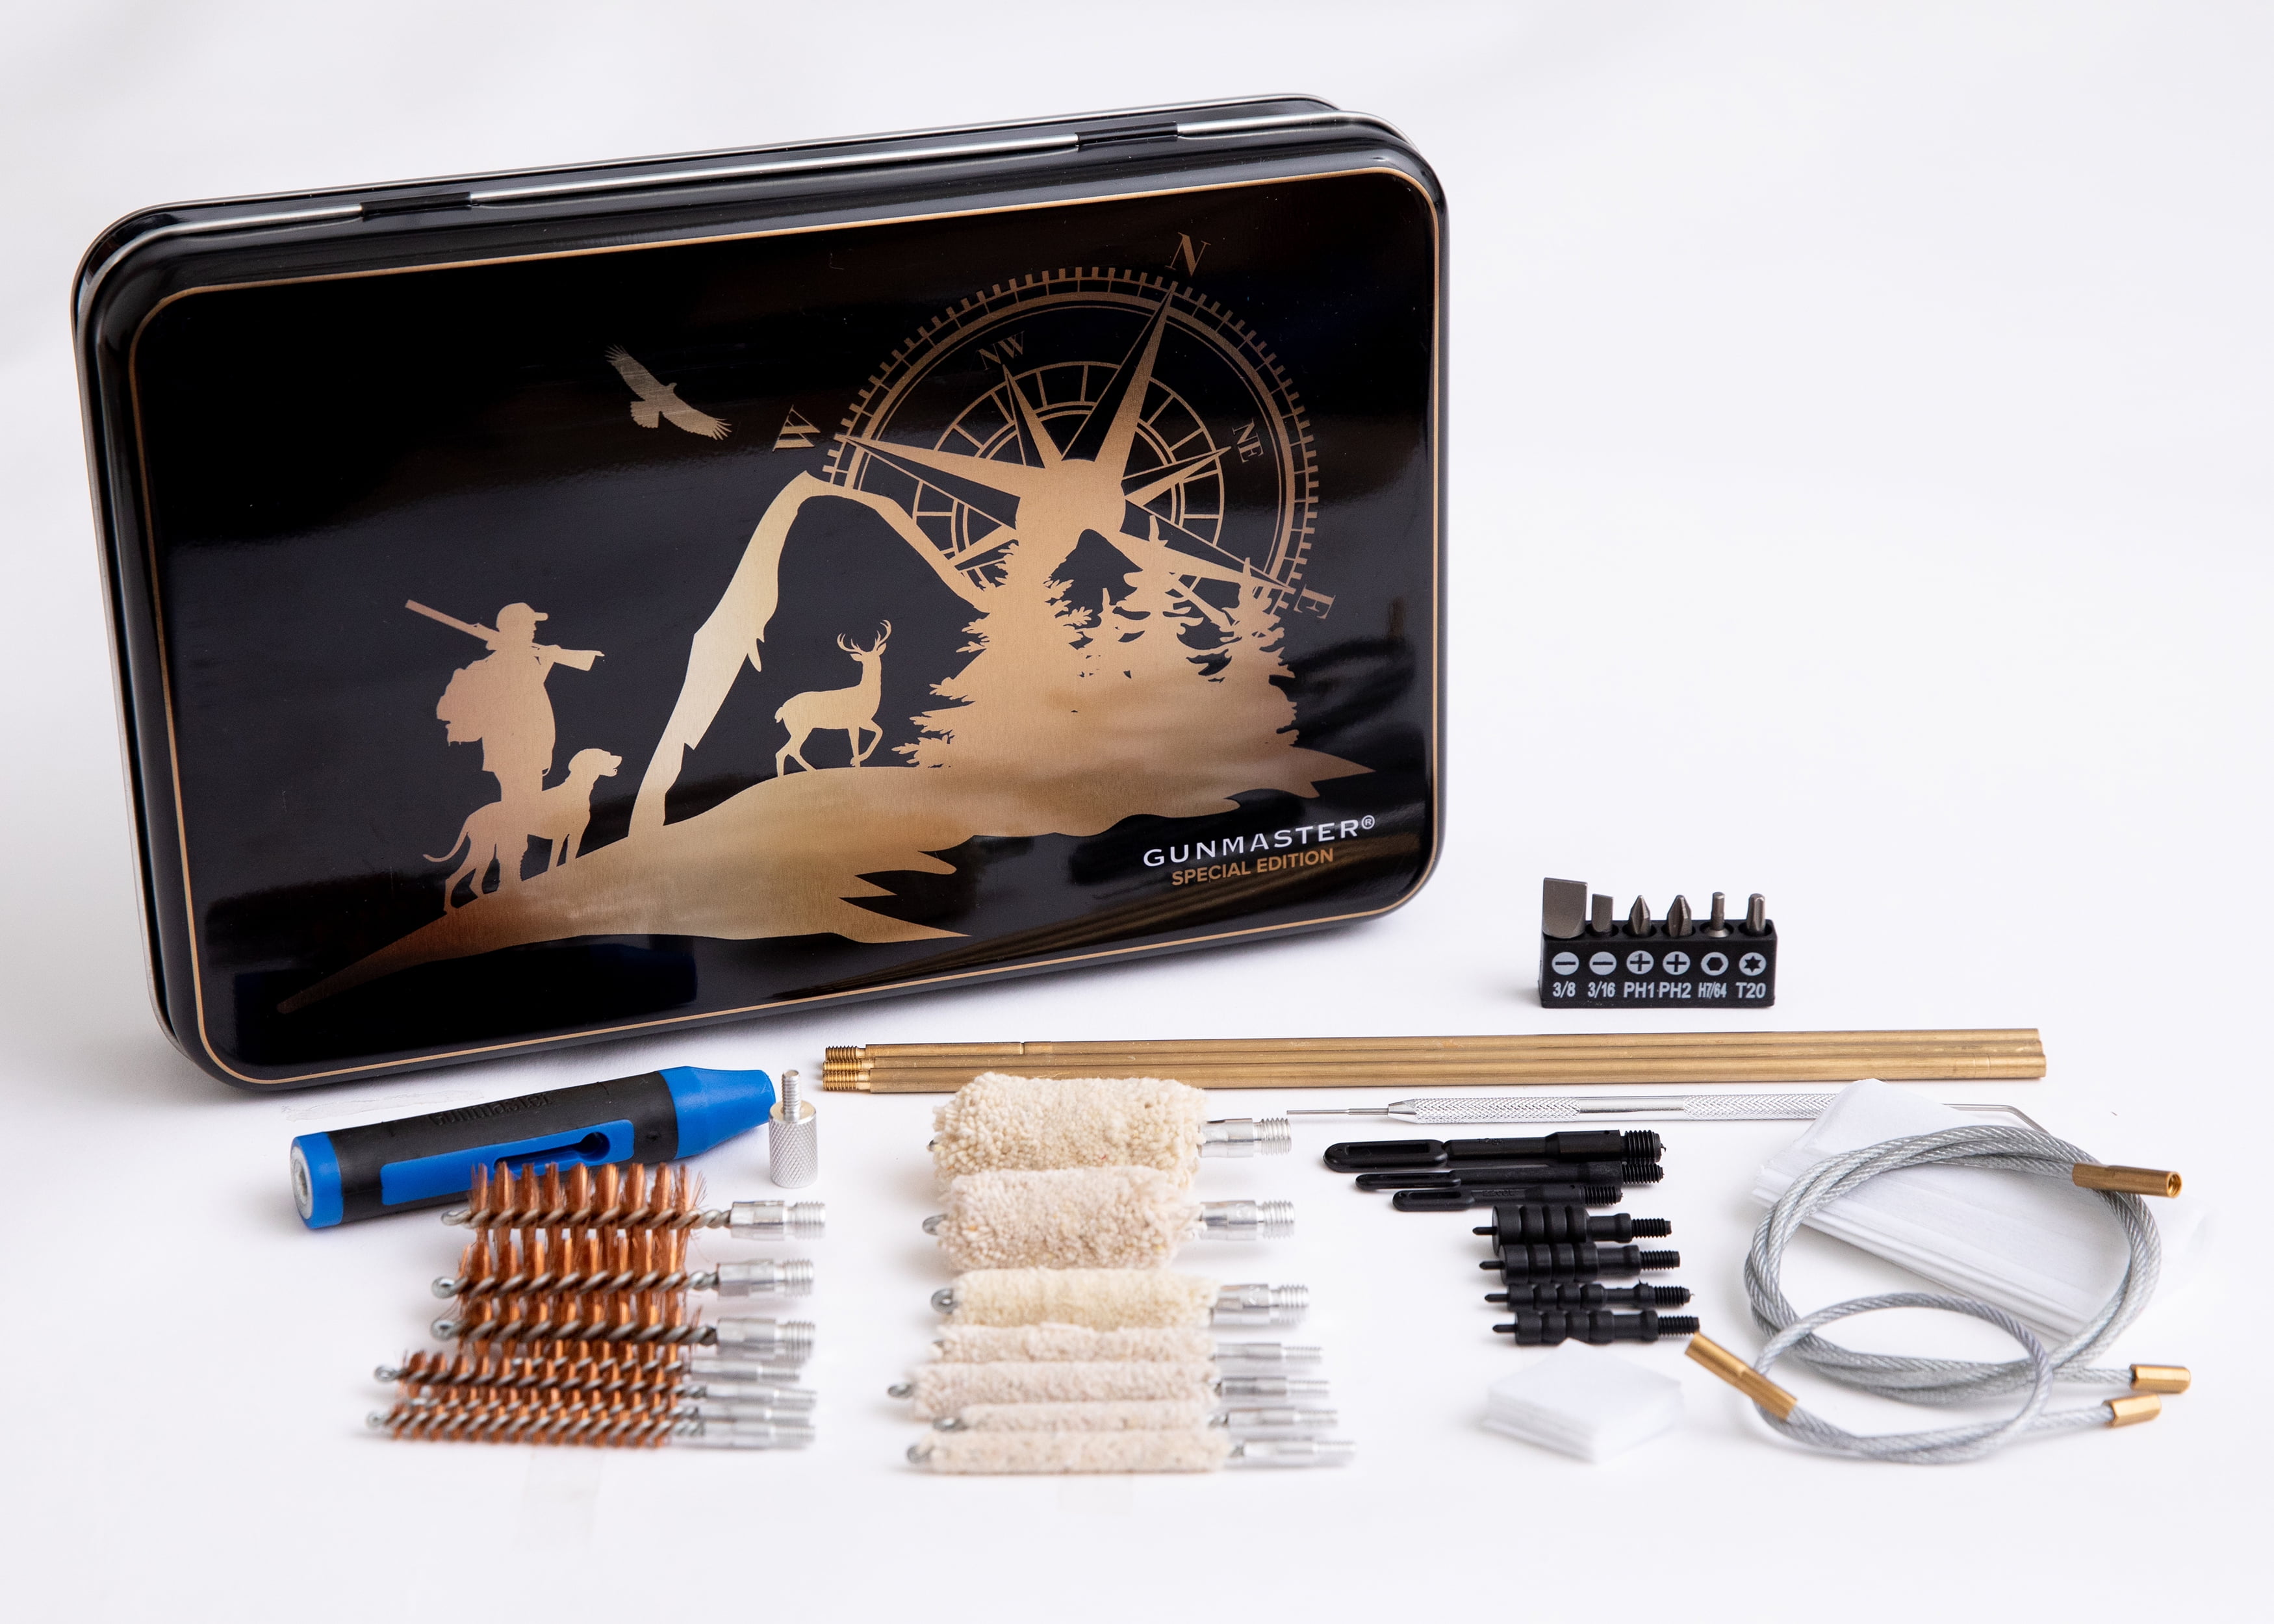 Gunmaster Special Edition 38 Piece Universal Gun Cleaning Kit (Compass)